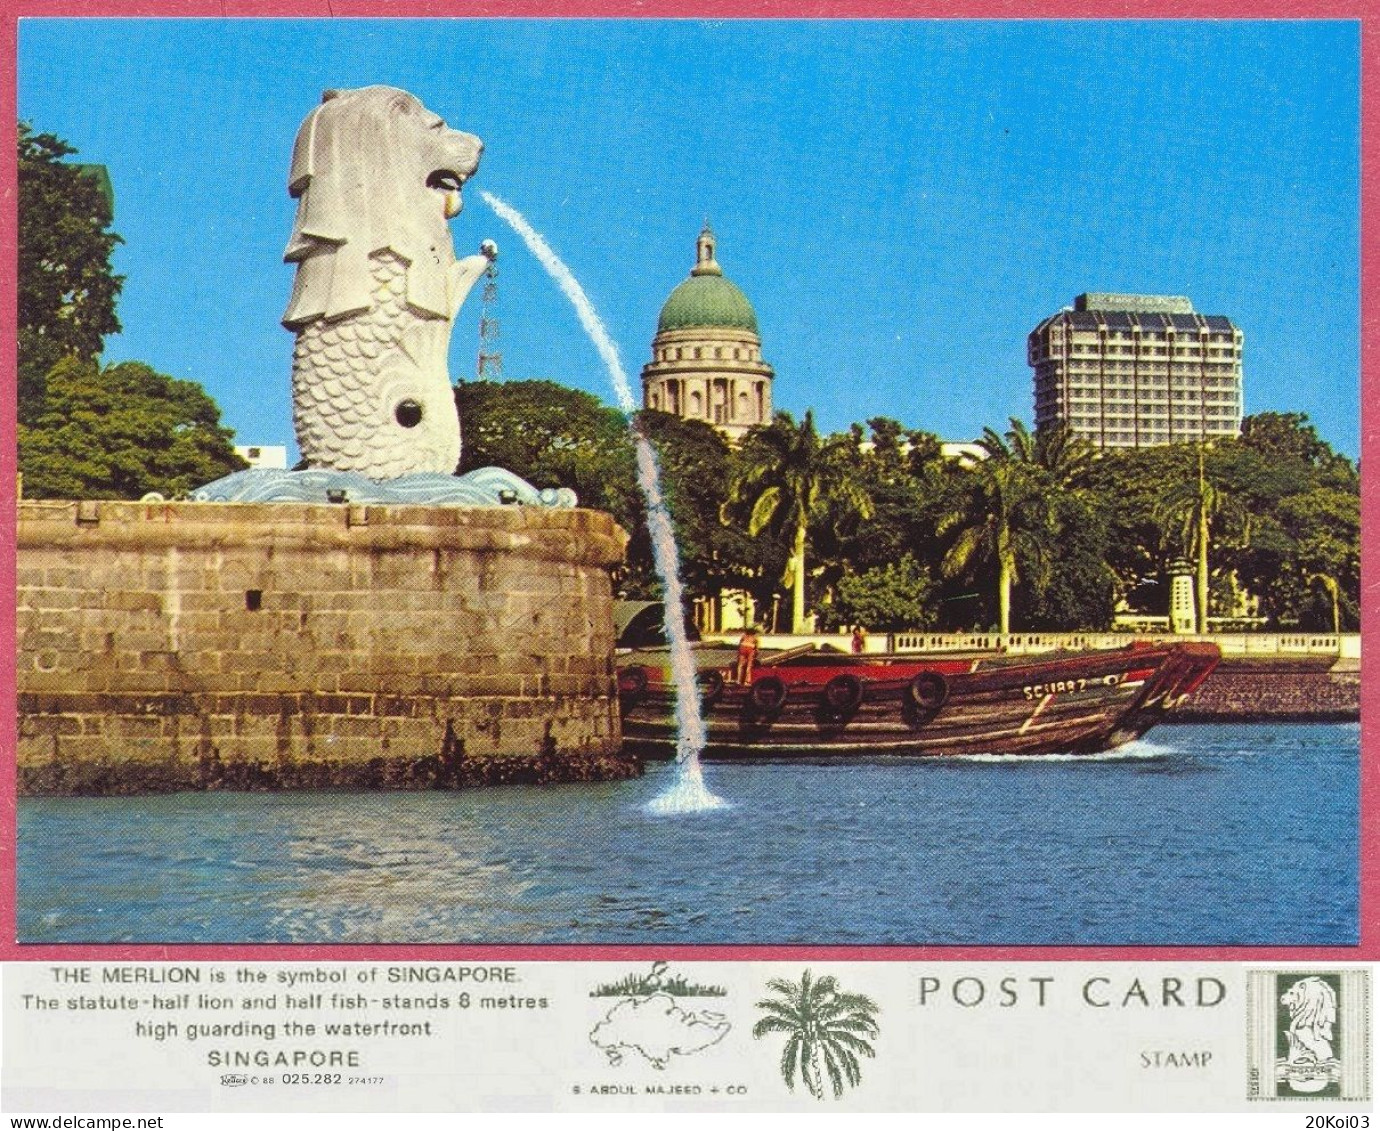 Singapore The MERLION Is The Symbol, Vintage 1972's Kruger 88 025.282  274177 S. ABDUL MAJEED+CO_UNC_cpc - Singapore